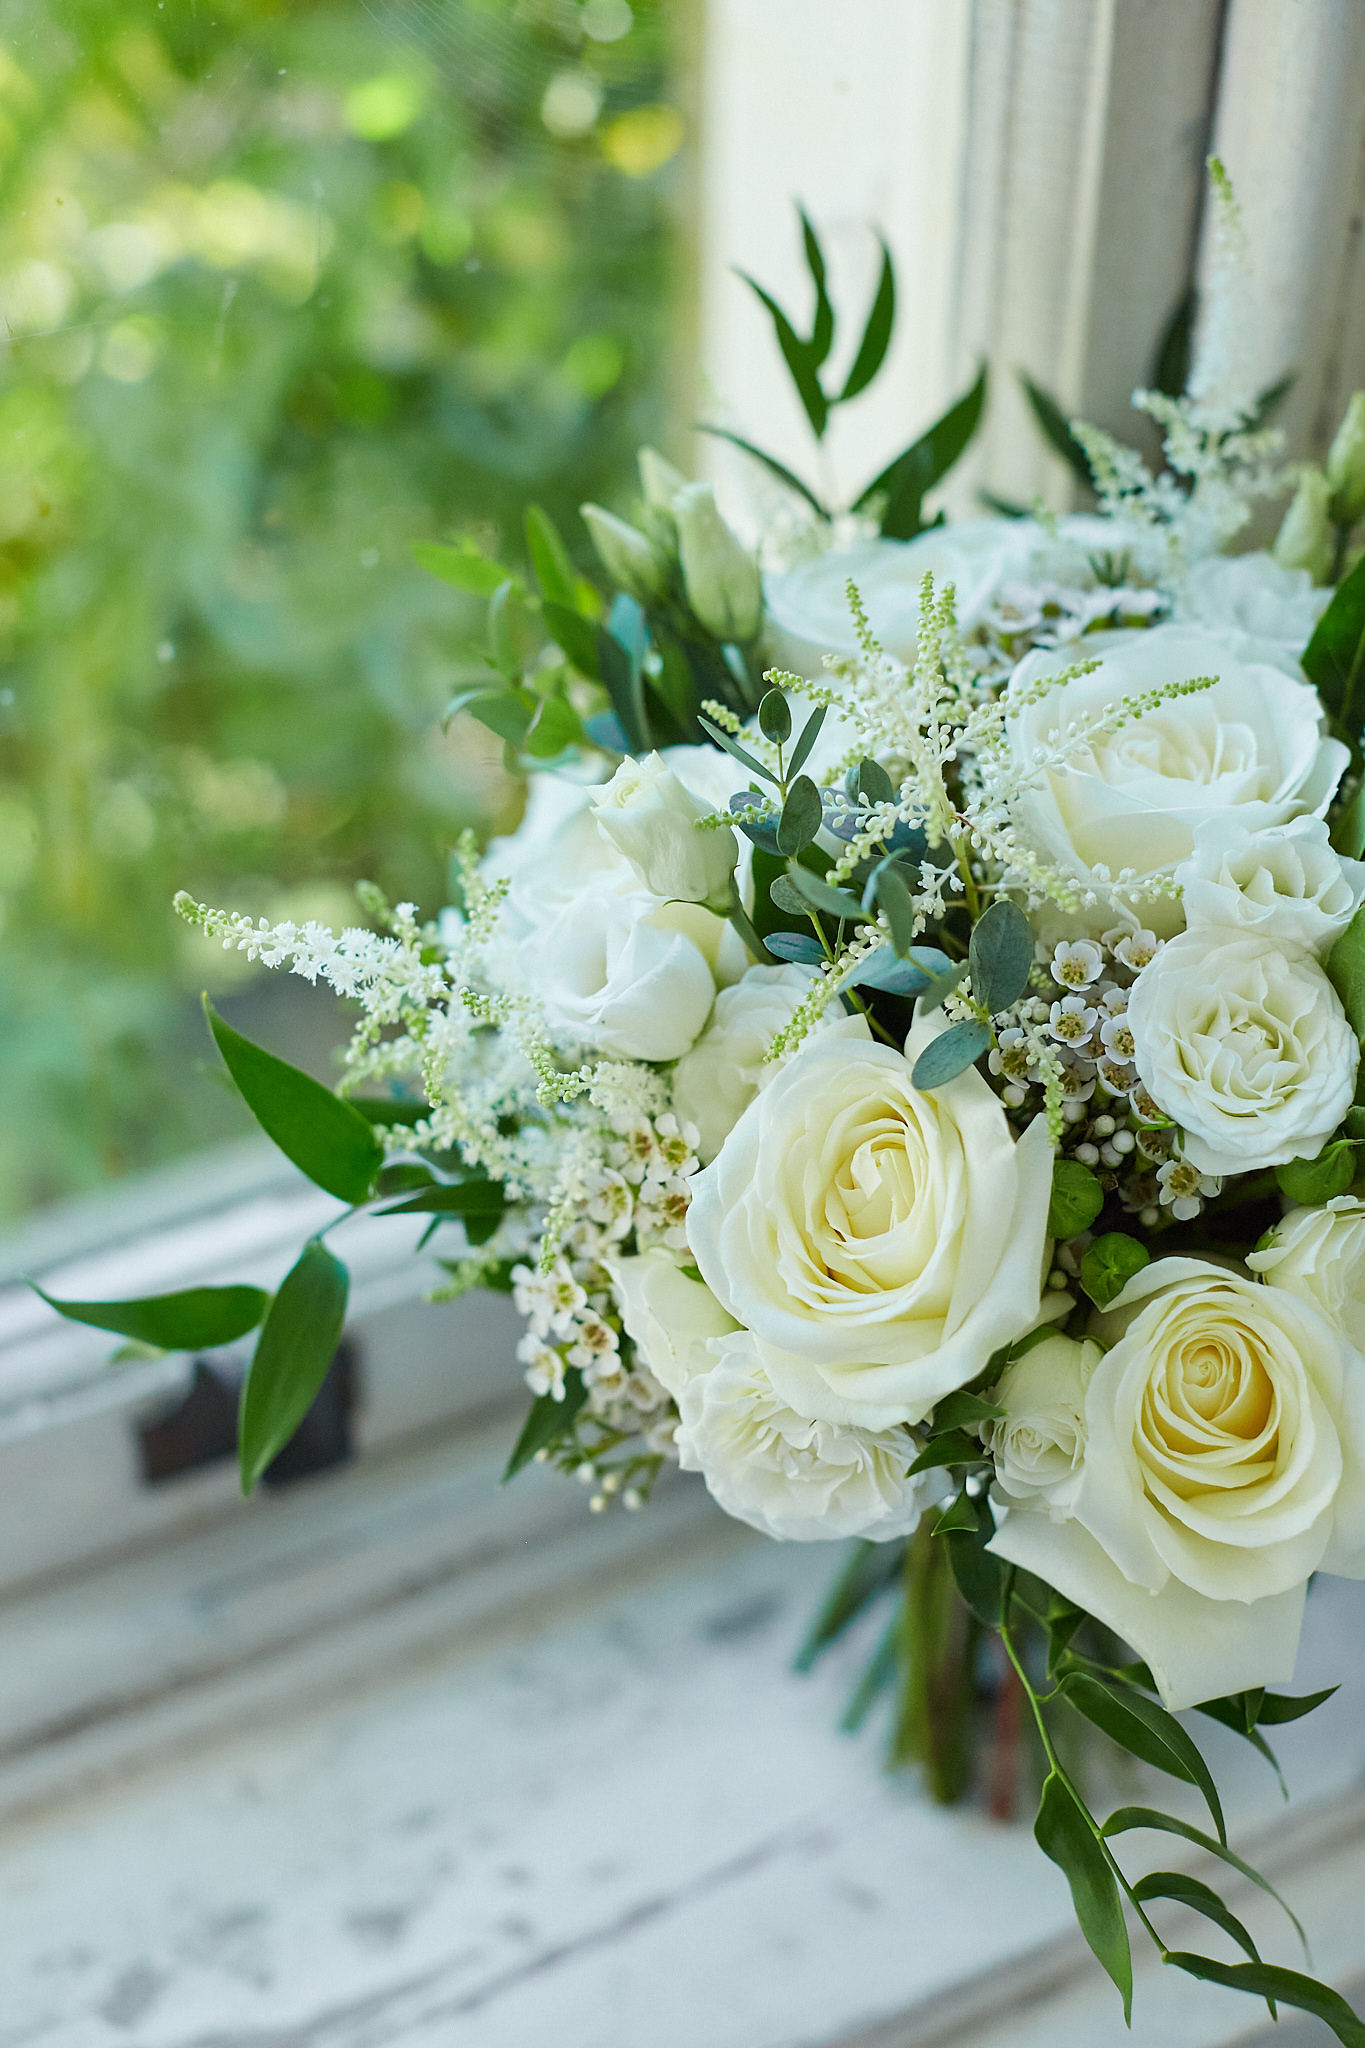 Green and white bridal bouquet sat on window ledge